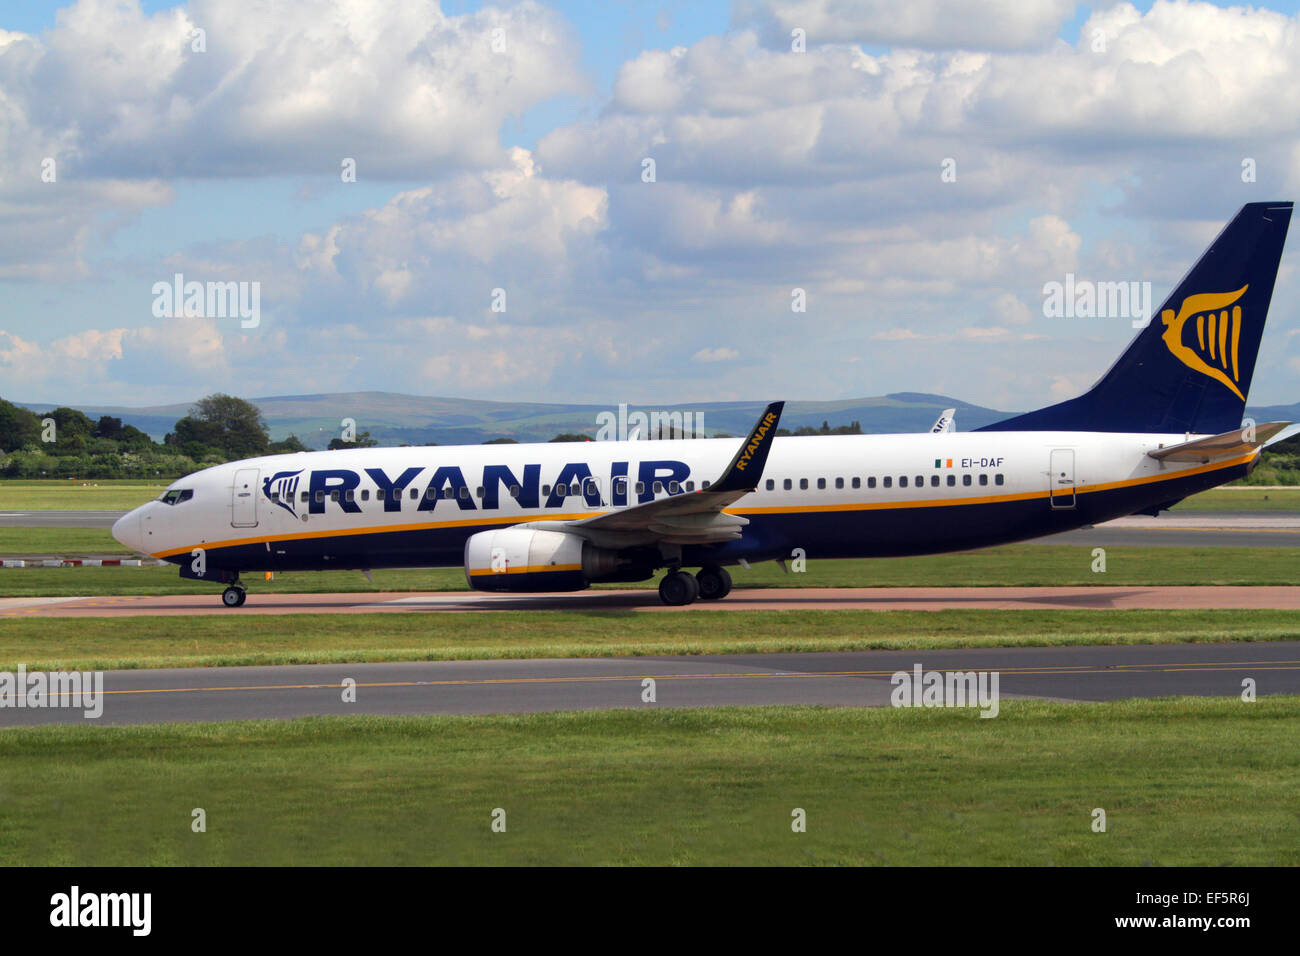 RYAN AIR BOEING 737-8AS AIRCRAFT EI-DAF MANCHESTER AIRPORT ENGLAND 14 May 2014 Stock Photo